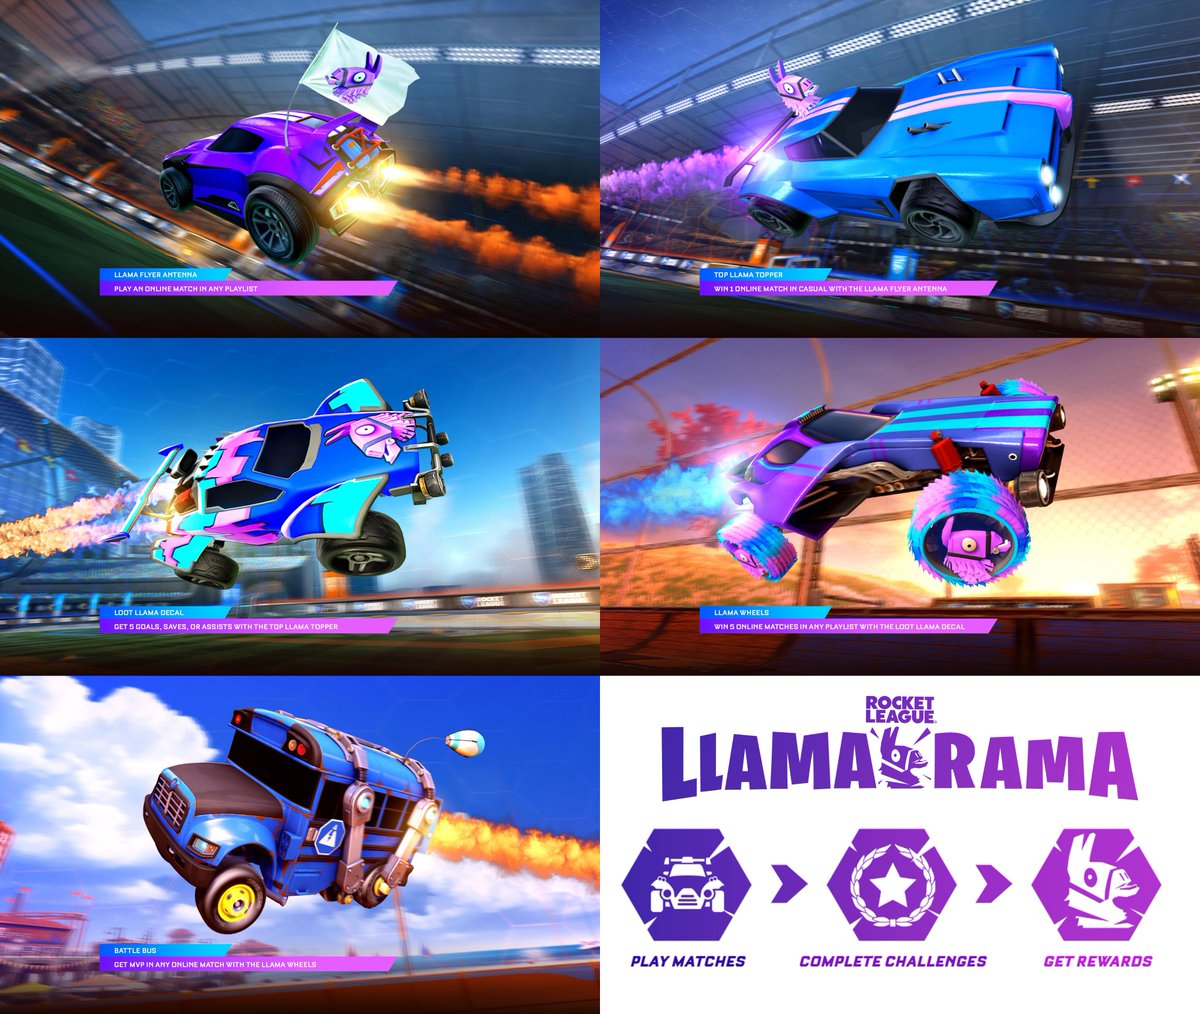 Ifiremonkey On Twitter Llama Rama Fortnite X Rocket League Has Begun Hop Into Rocket League To Complete Challenges And Get Some Cool Rewards Who Knows Maybe You Ll Go Up Against Me In A